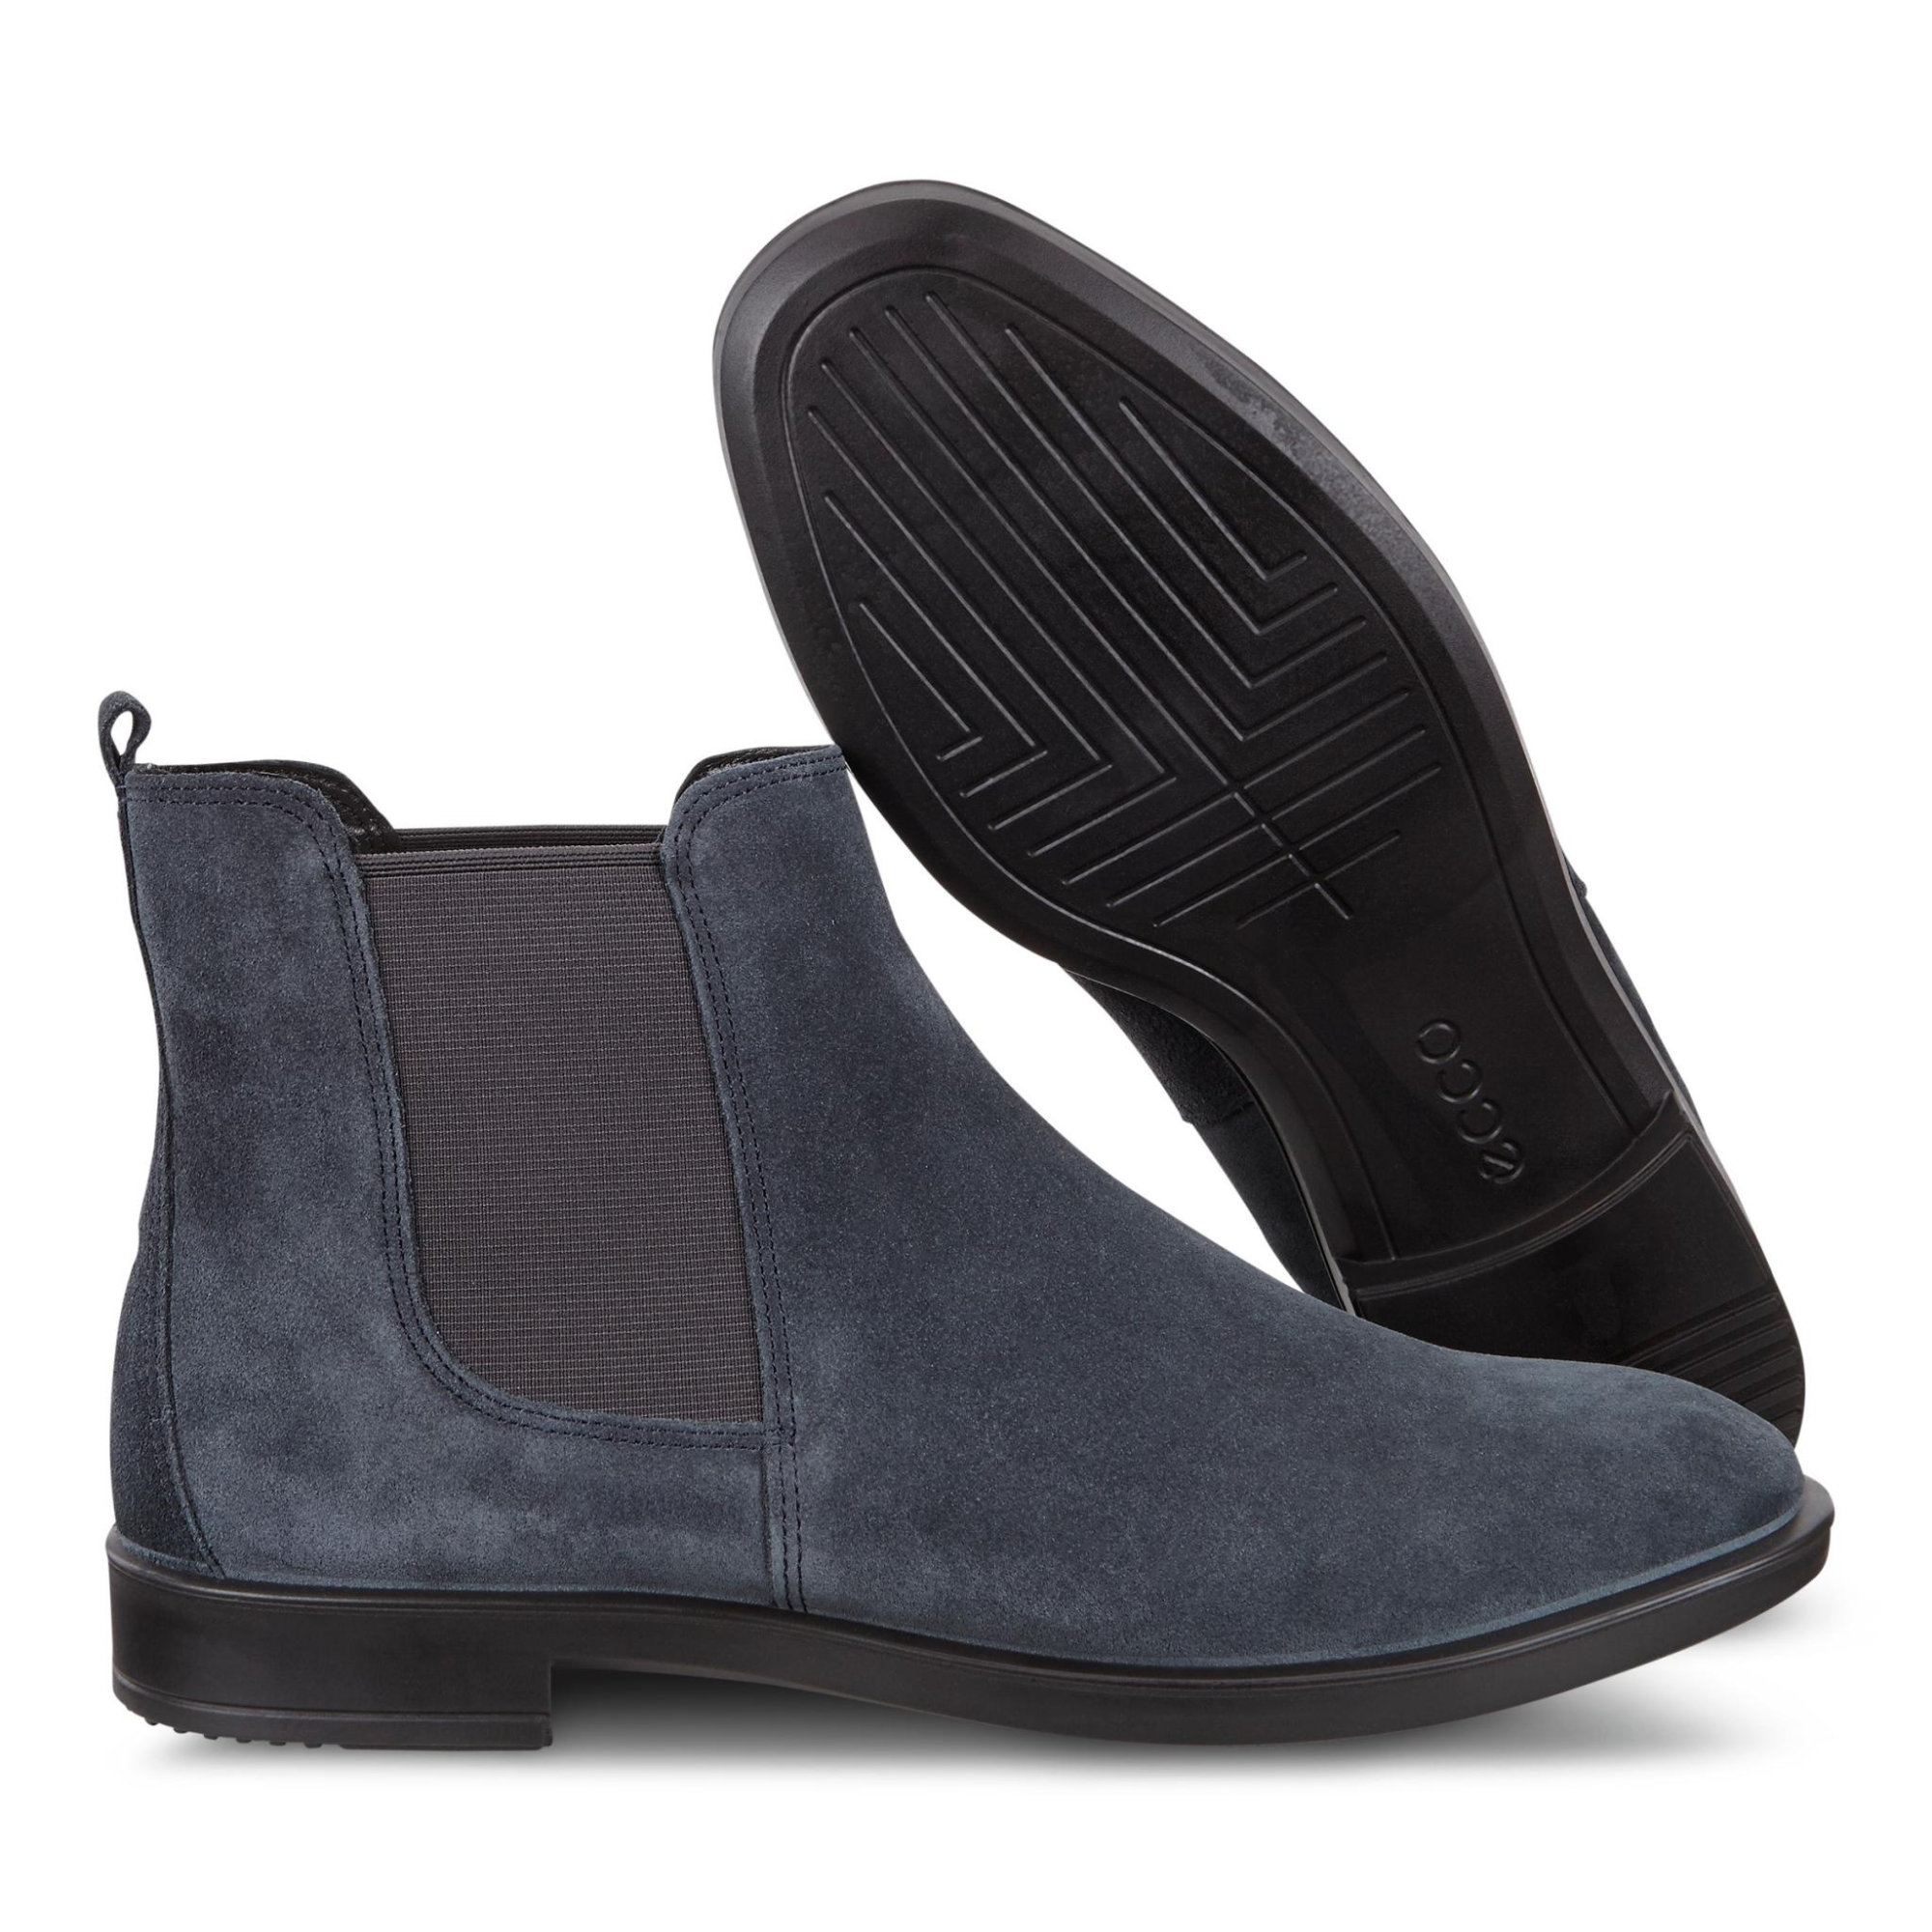 Ecco Shape 15 Chelsea Boot 38 - Products - Mall - Veryk Mall, many product, quick response, your money!